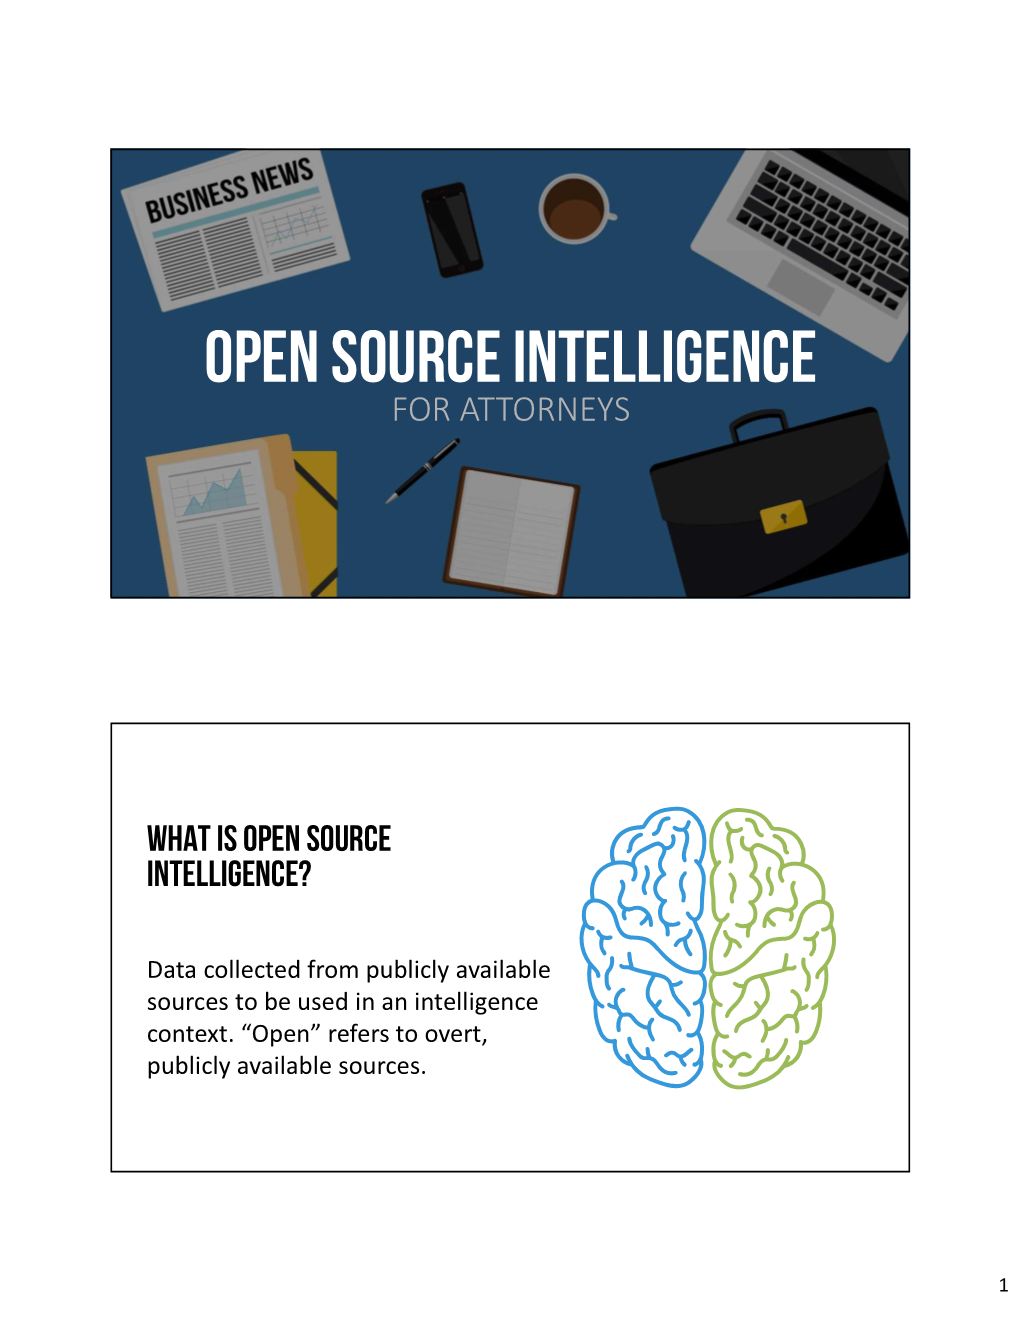 Open Source Intelligence for Attorneys